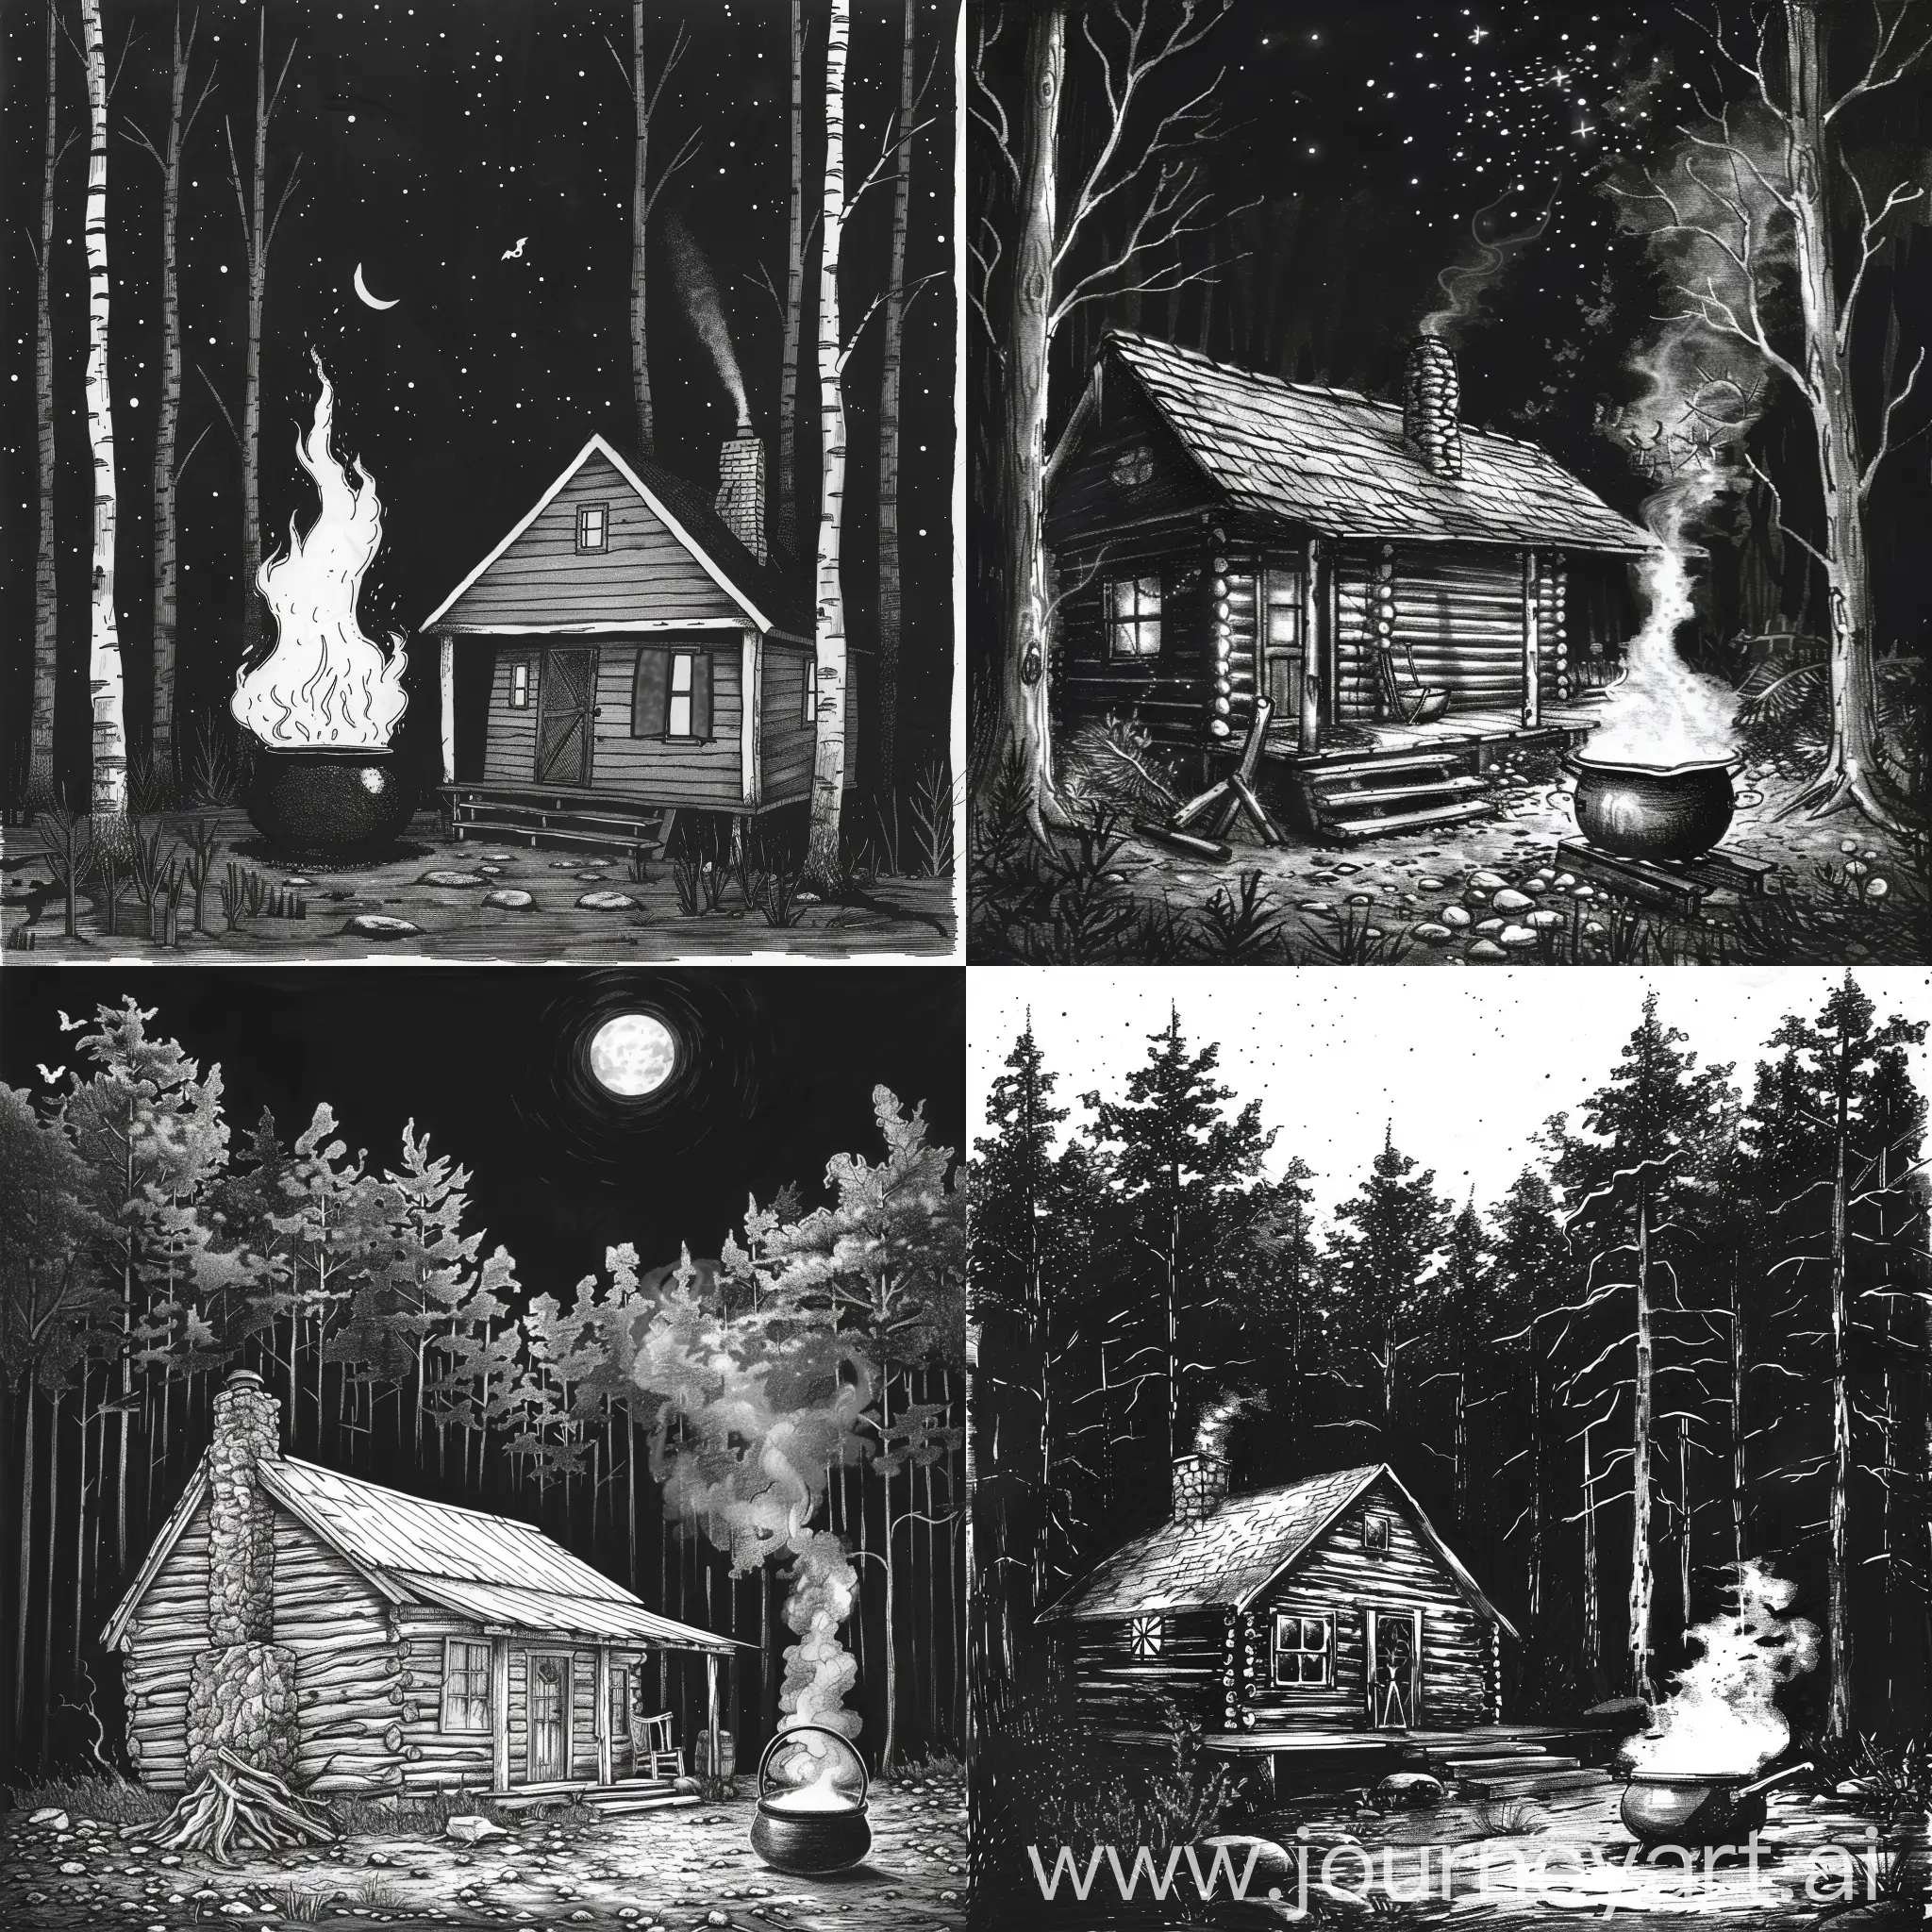 Eerie-Night-Spooky-Cabin-and-Boiling-Cauldron-in-Black-and-White-Sketch